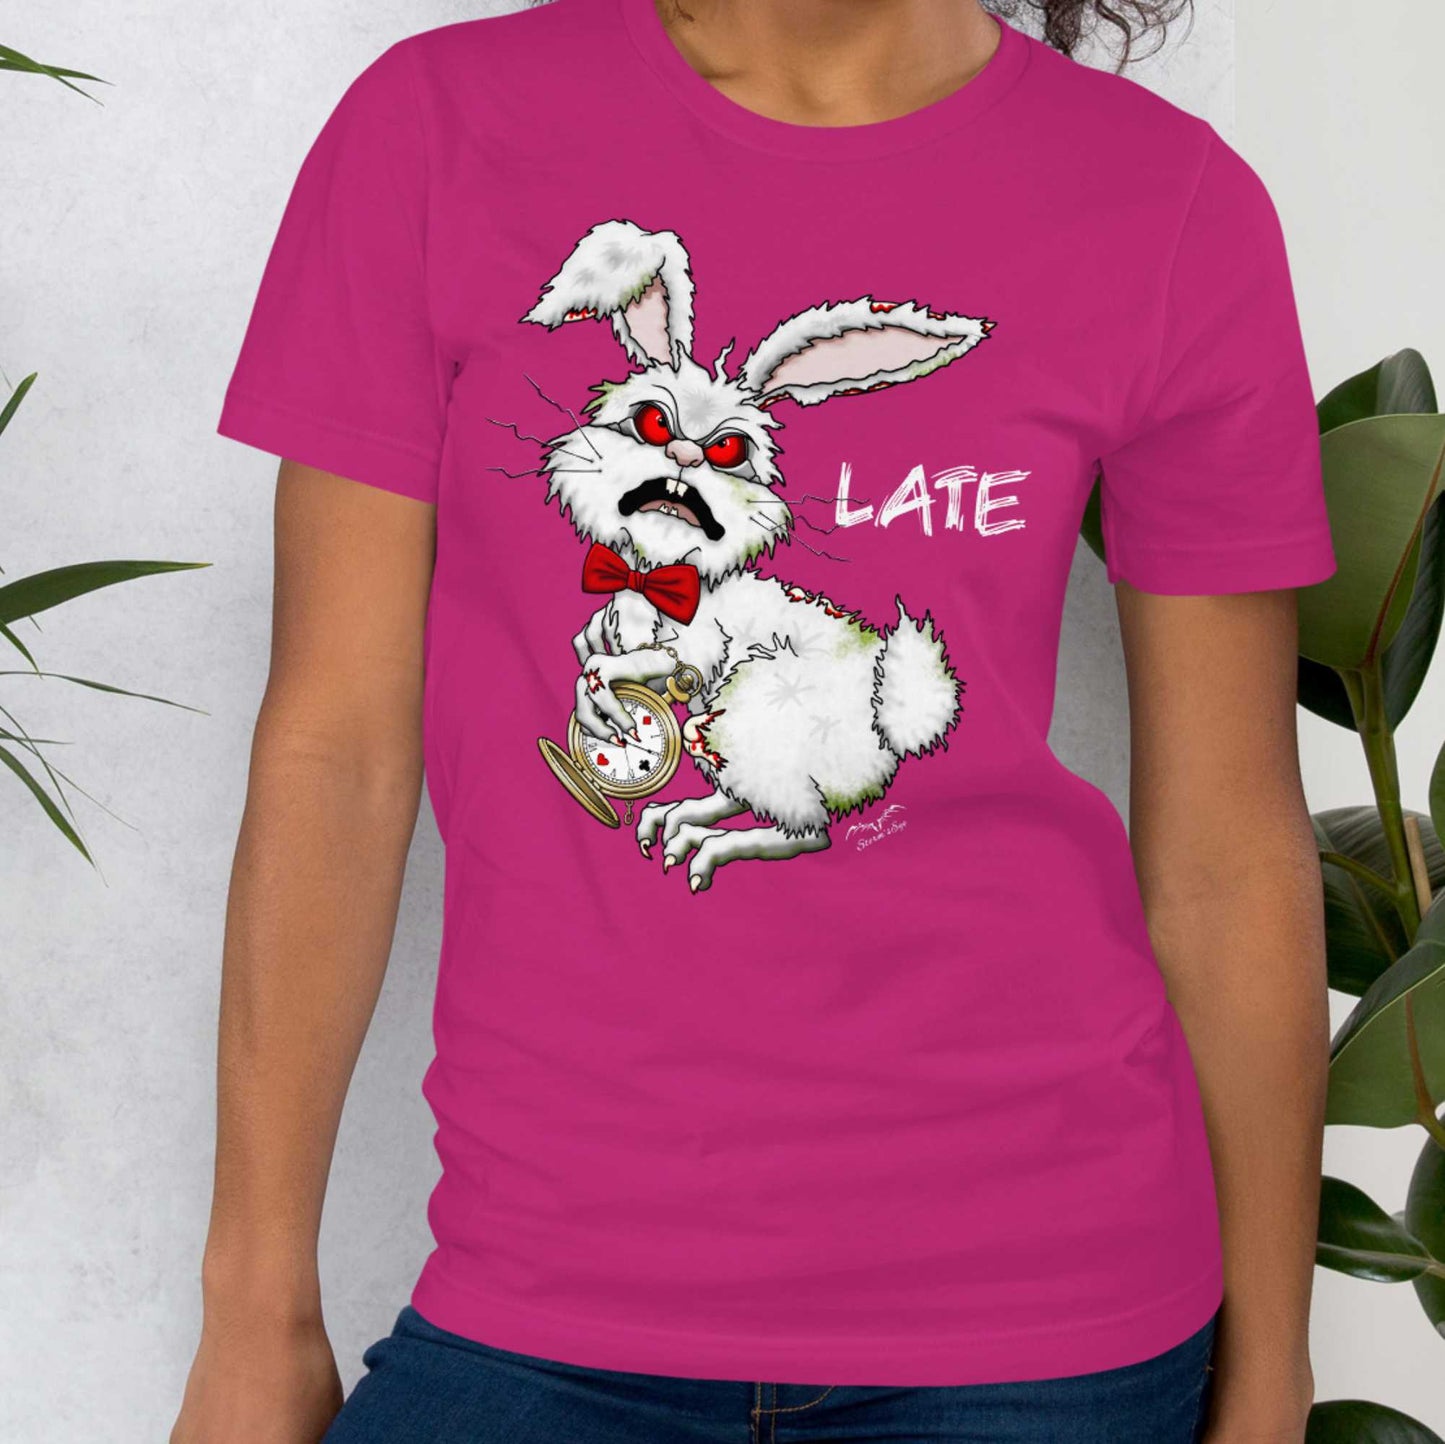 Stormseye Design zombie bunny t shirt, modelled view pink